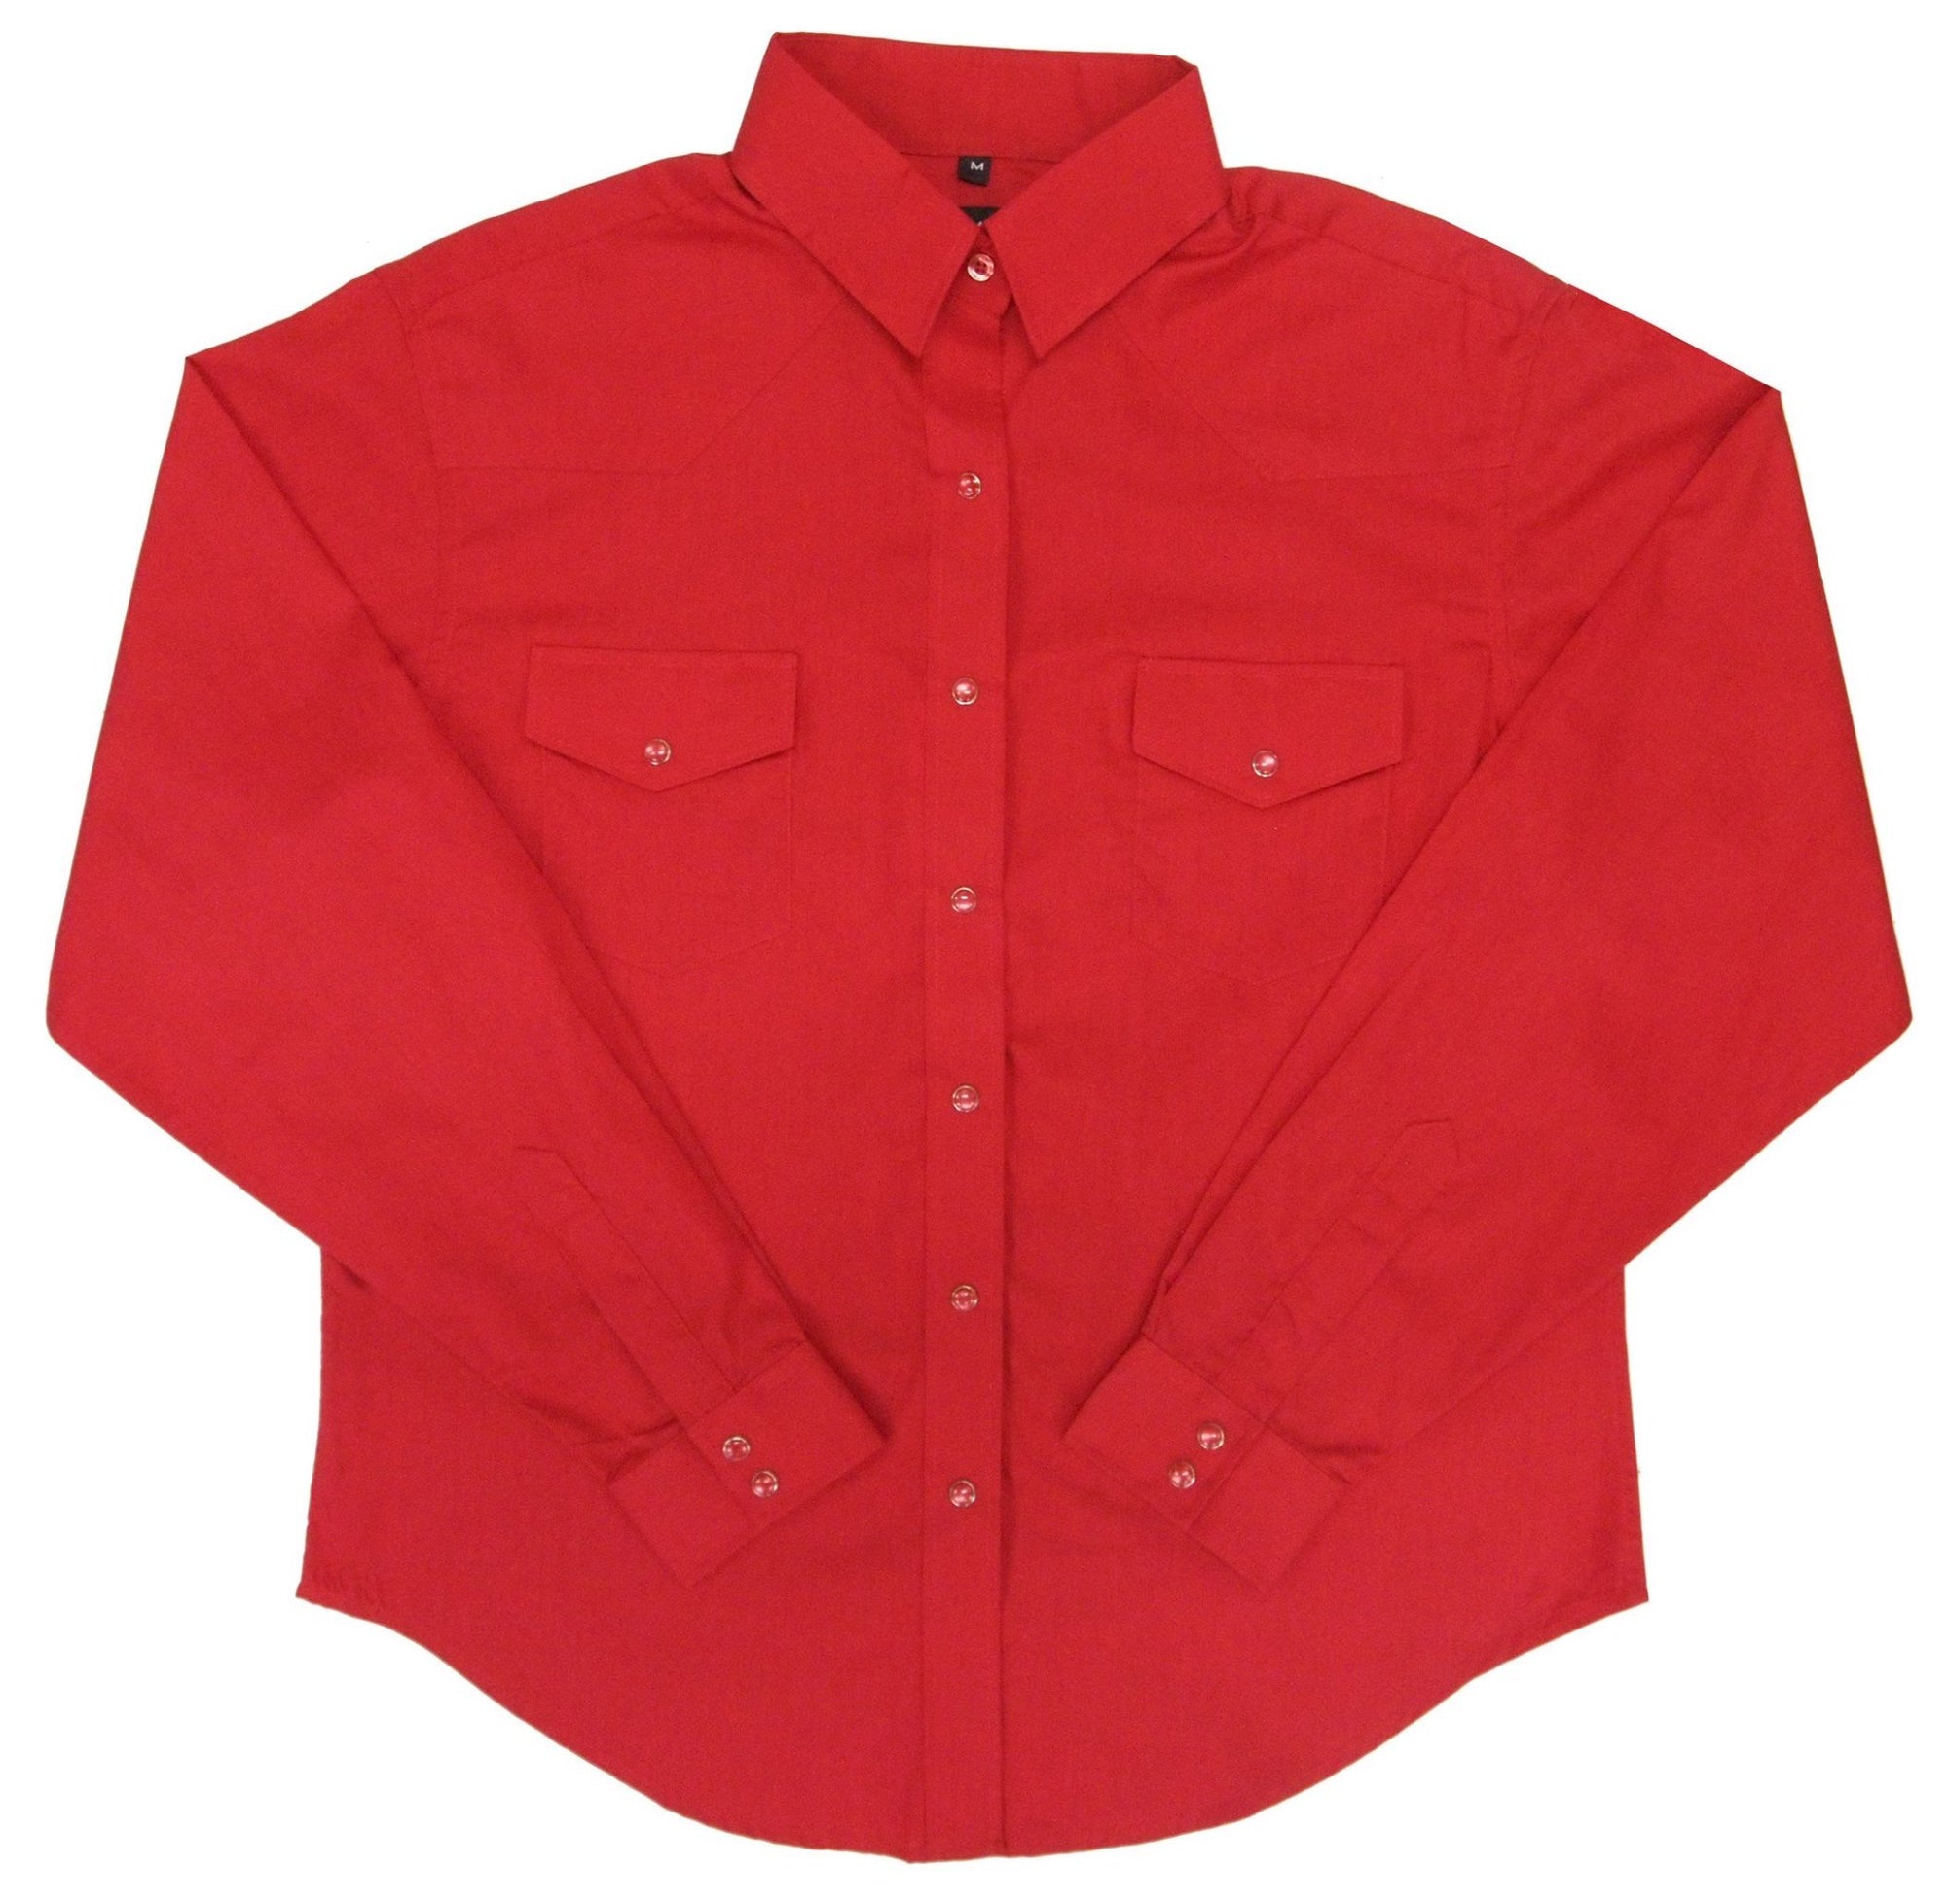 White Horse Apparel Women's Western Shirt Red